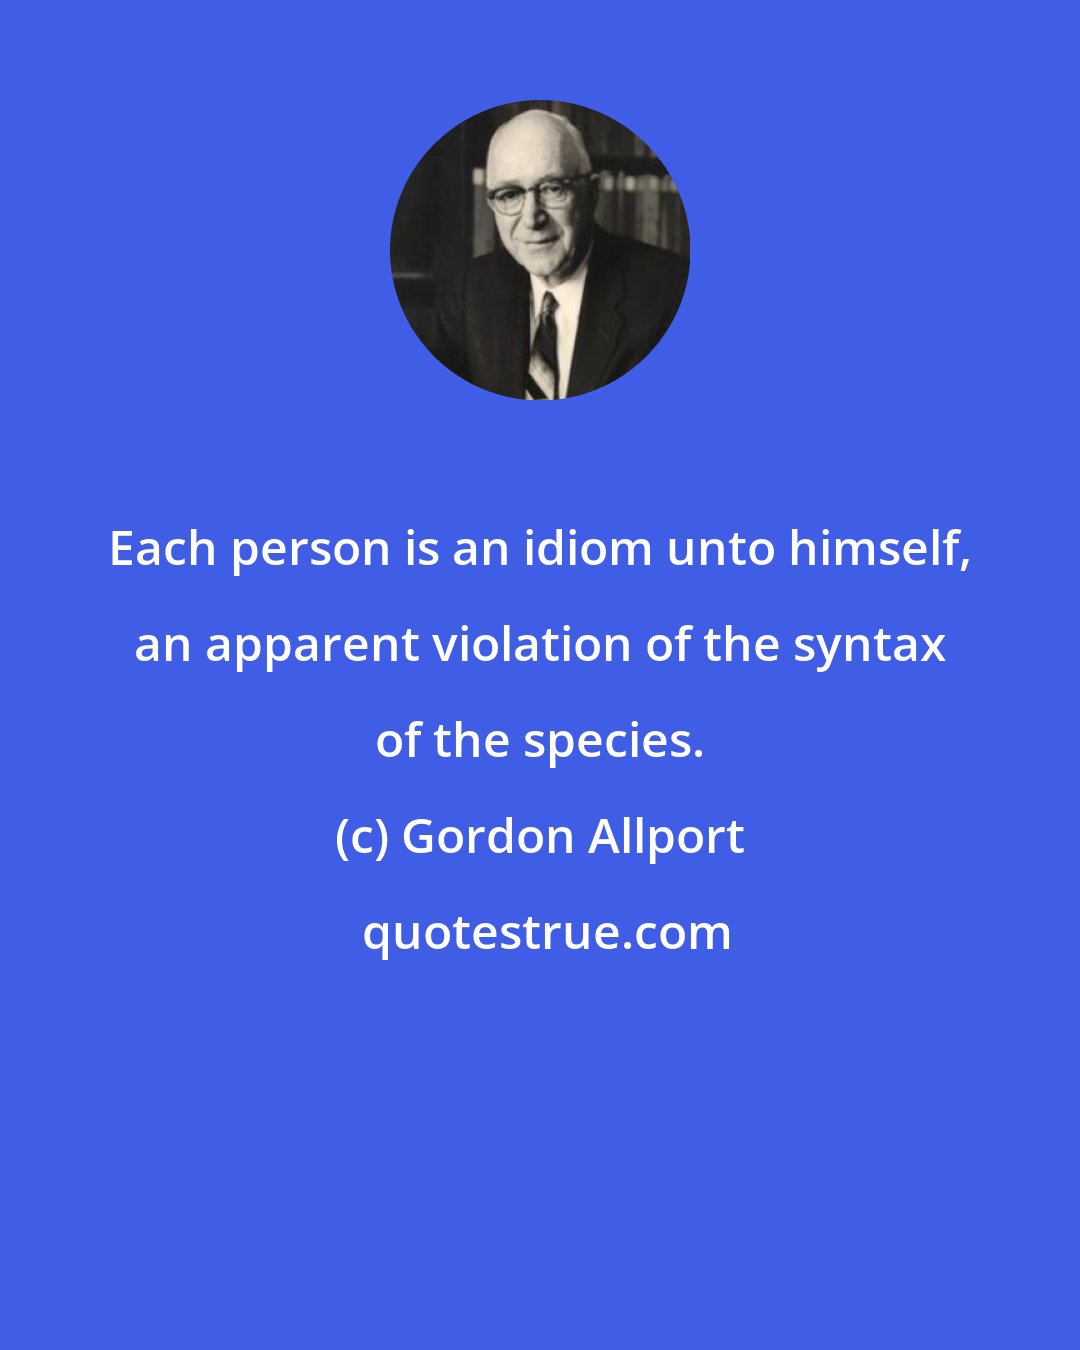 Gordon Allport: Each person is an idiom unto himself, an apparent violation of the syntax of the species.